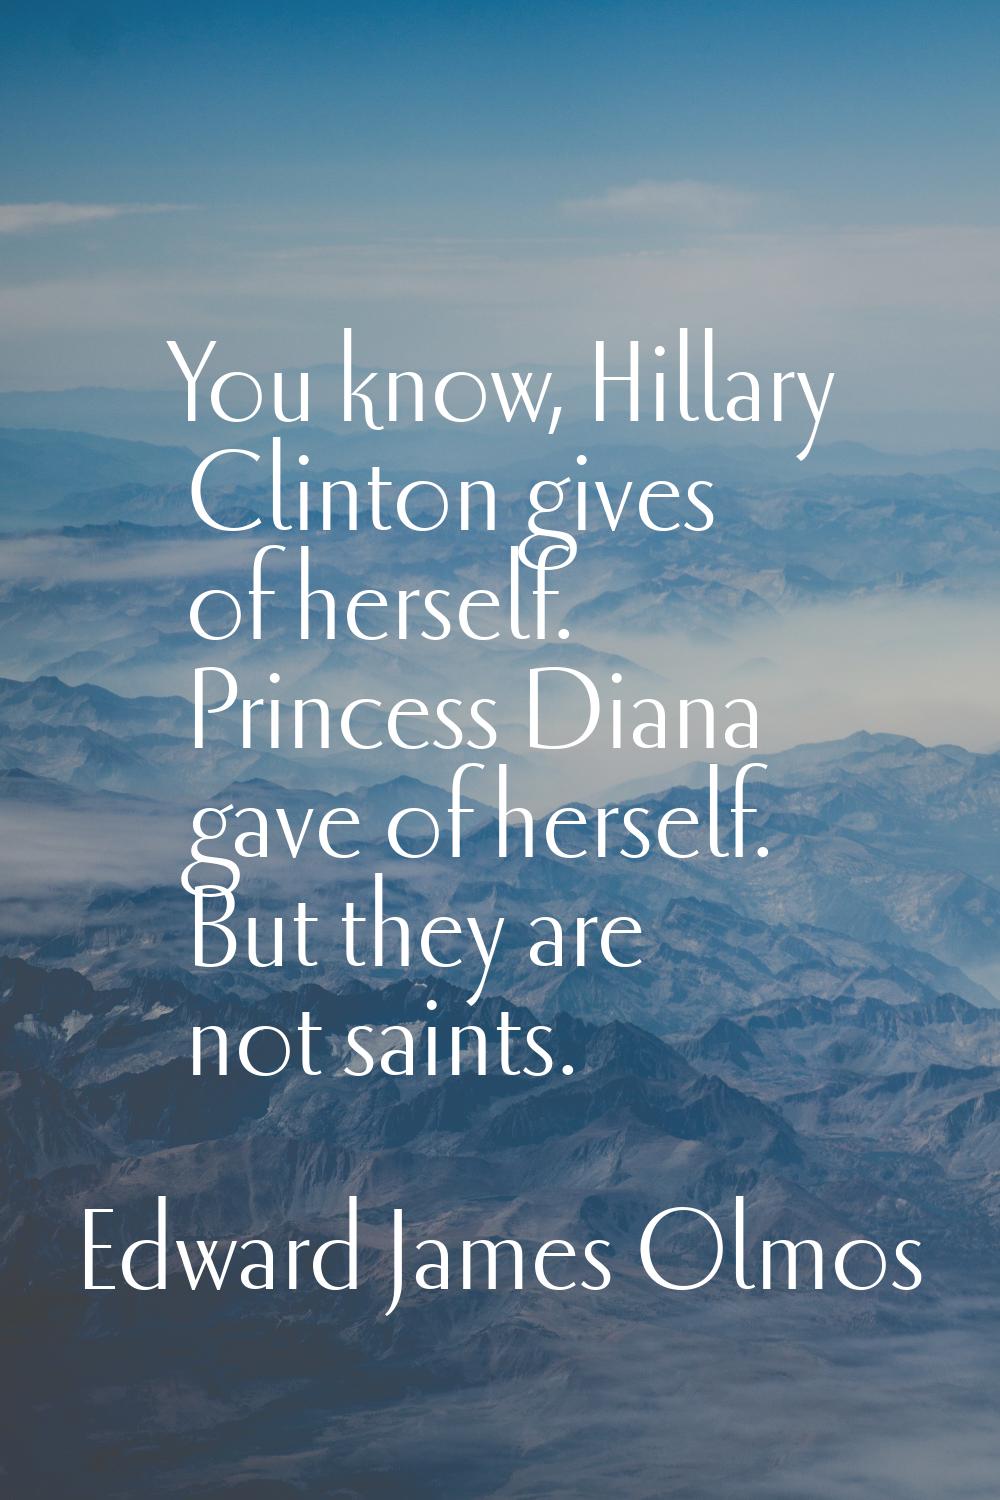 You know, Hillary Clinton gives of herself. Princess Diana gave of herself. But they are not saints